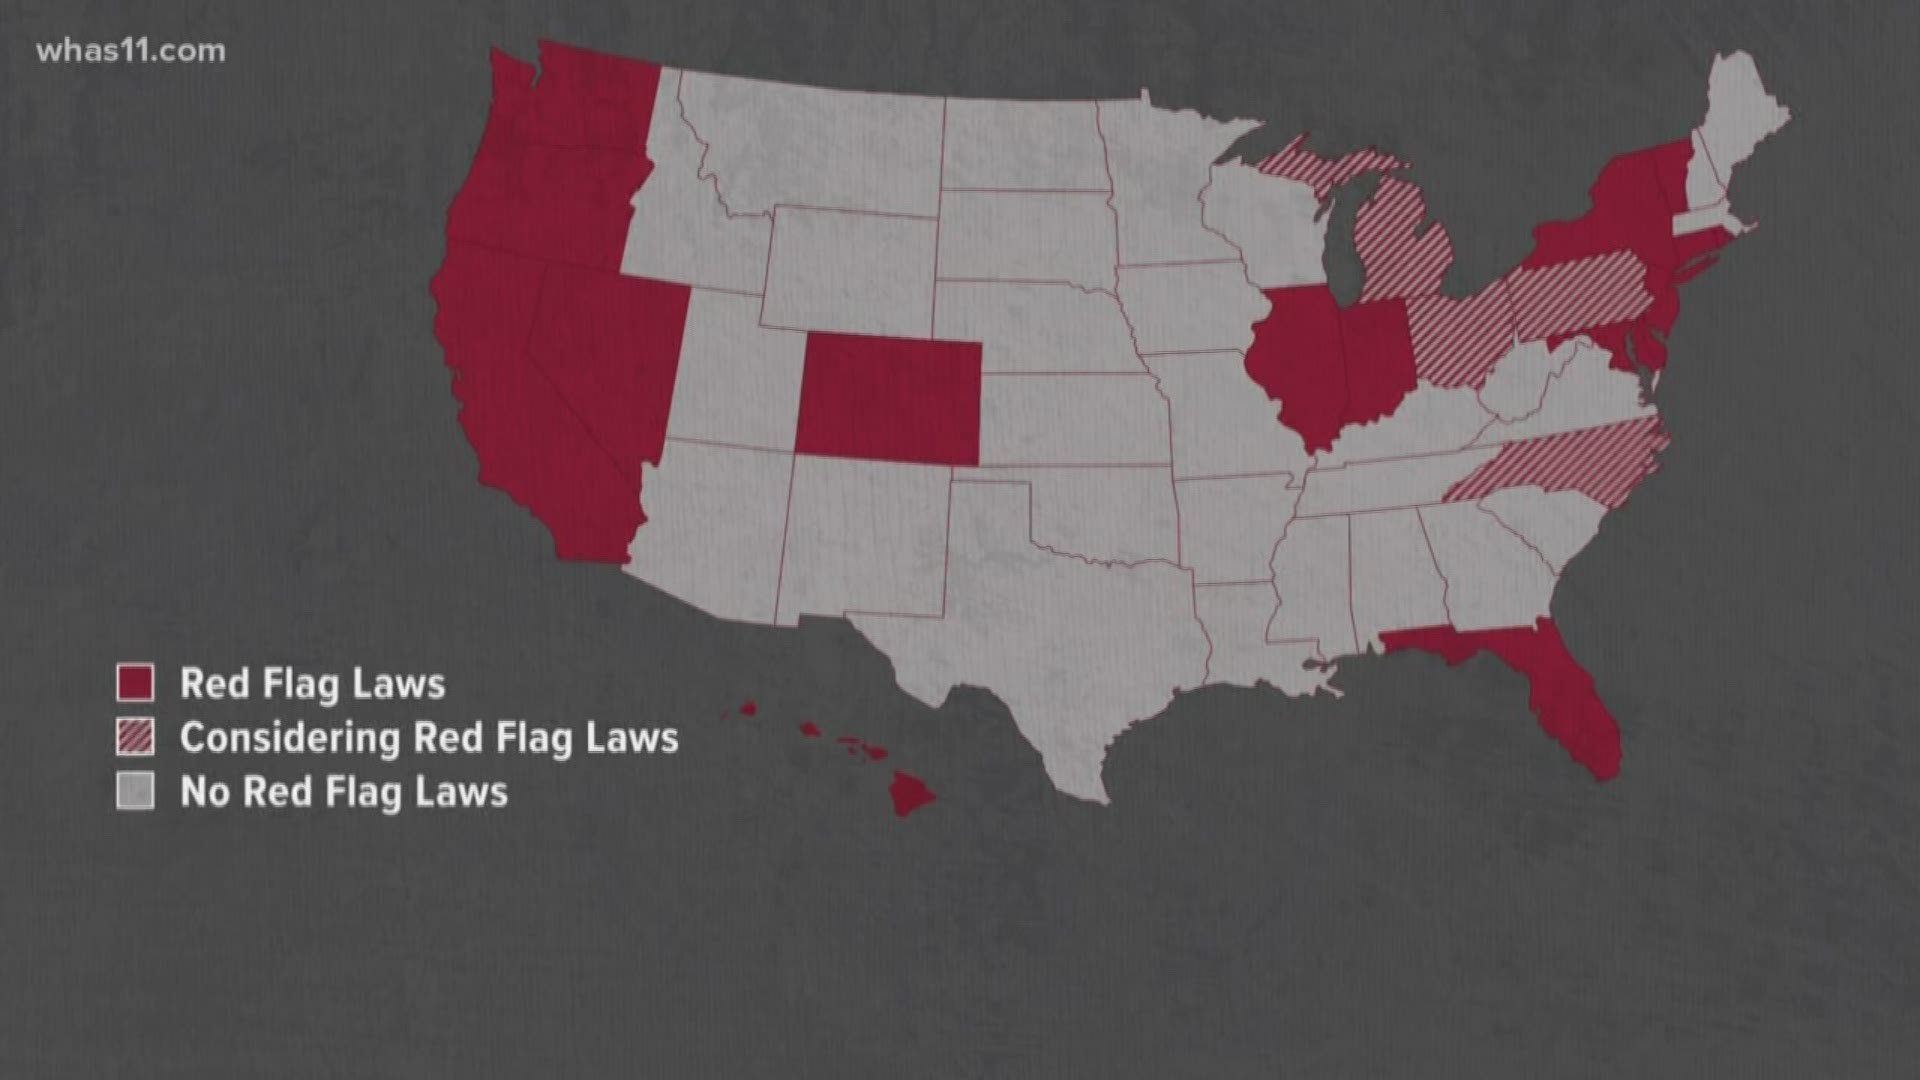 Red Flag laws allow a judge to temporarily restrict a person who poses a threat to either themselves or others from accessing or buying a gun.